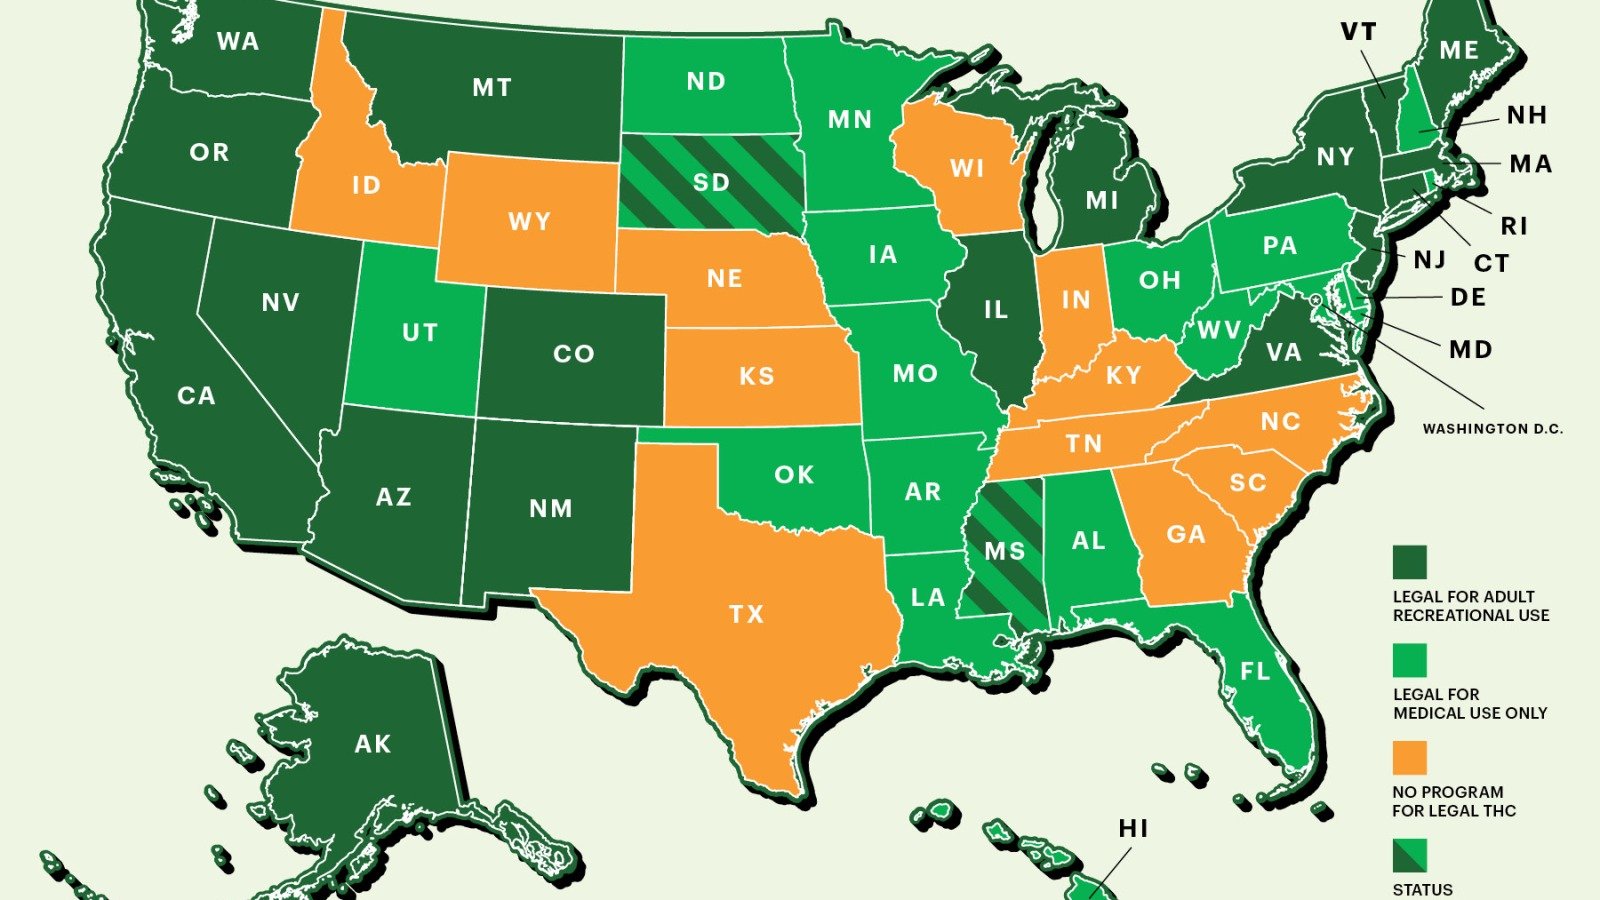 Curious about the status of cannabis? Here’s where legalization stands, state by state